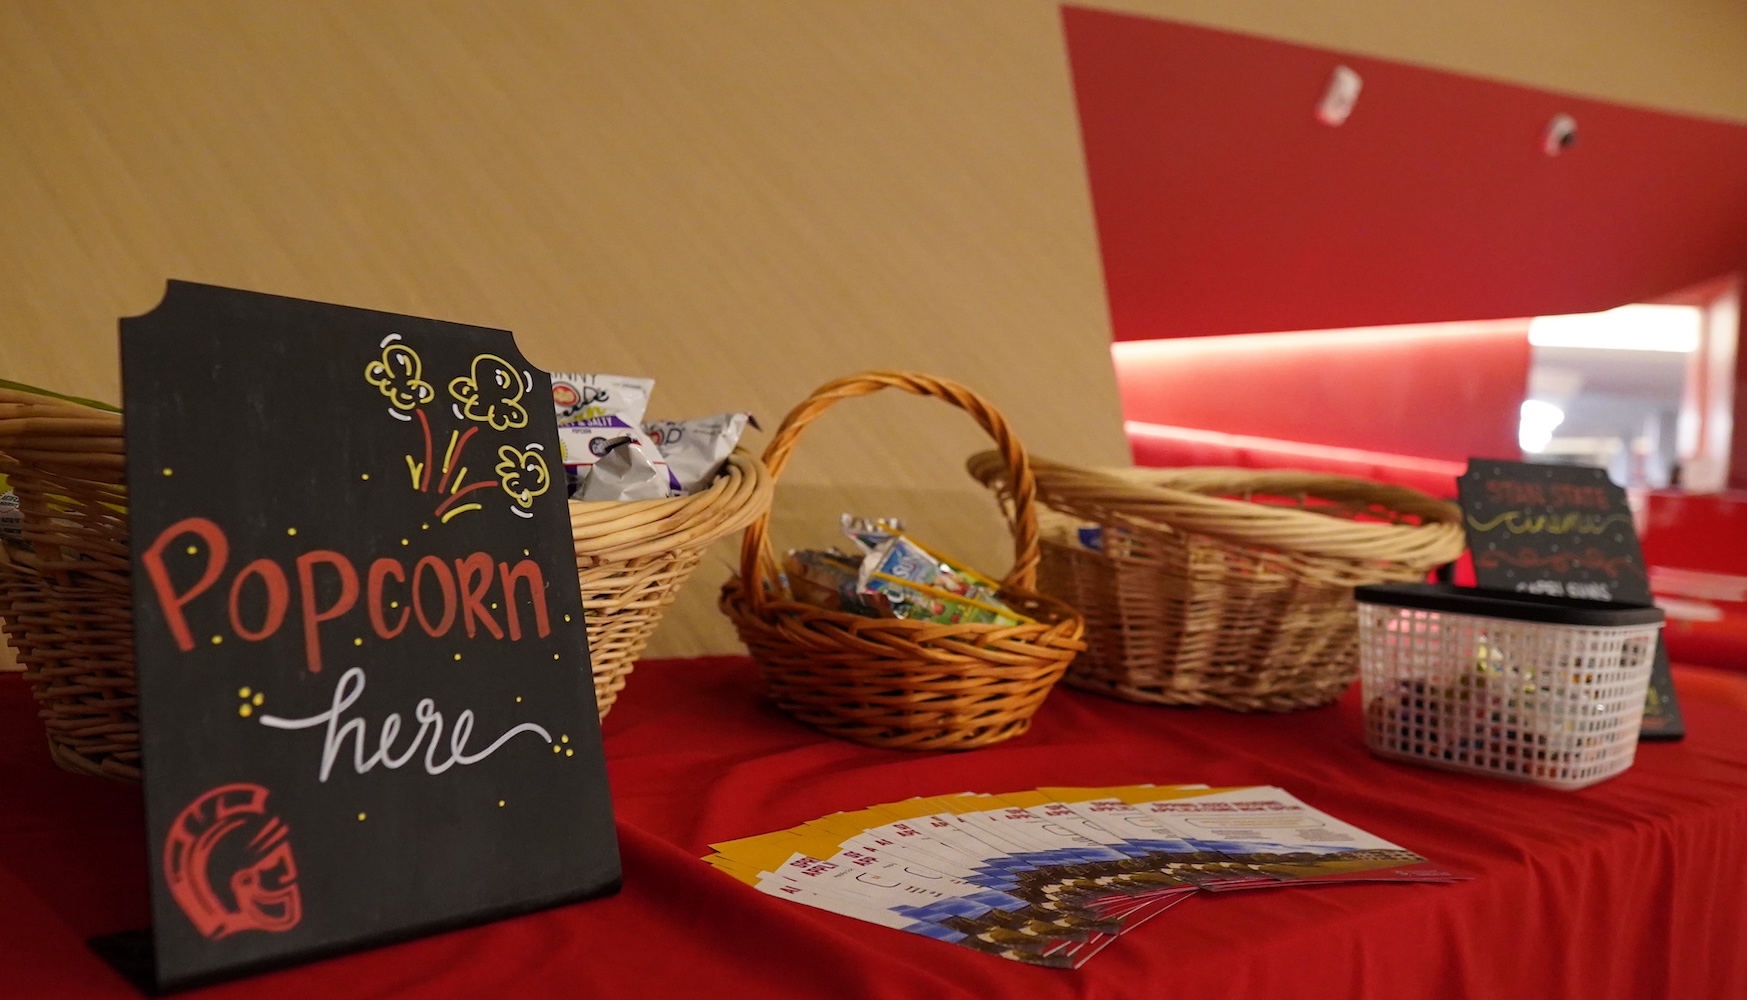 Table with small baskets filled with snacks, sign that reads "Popcorn here"